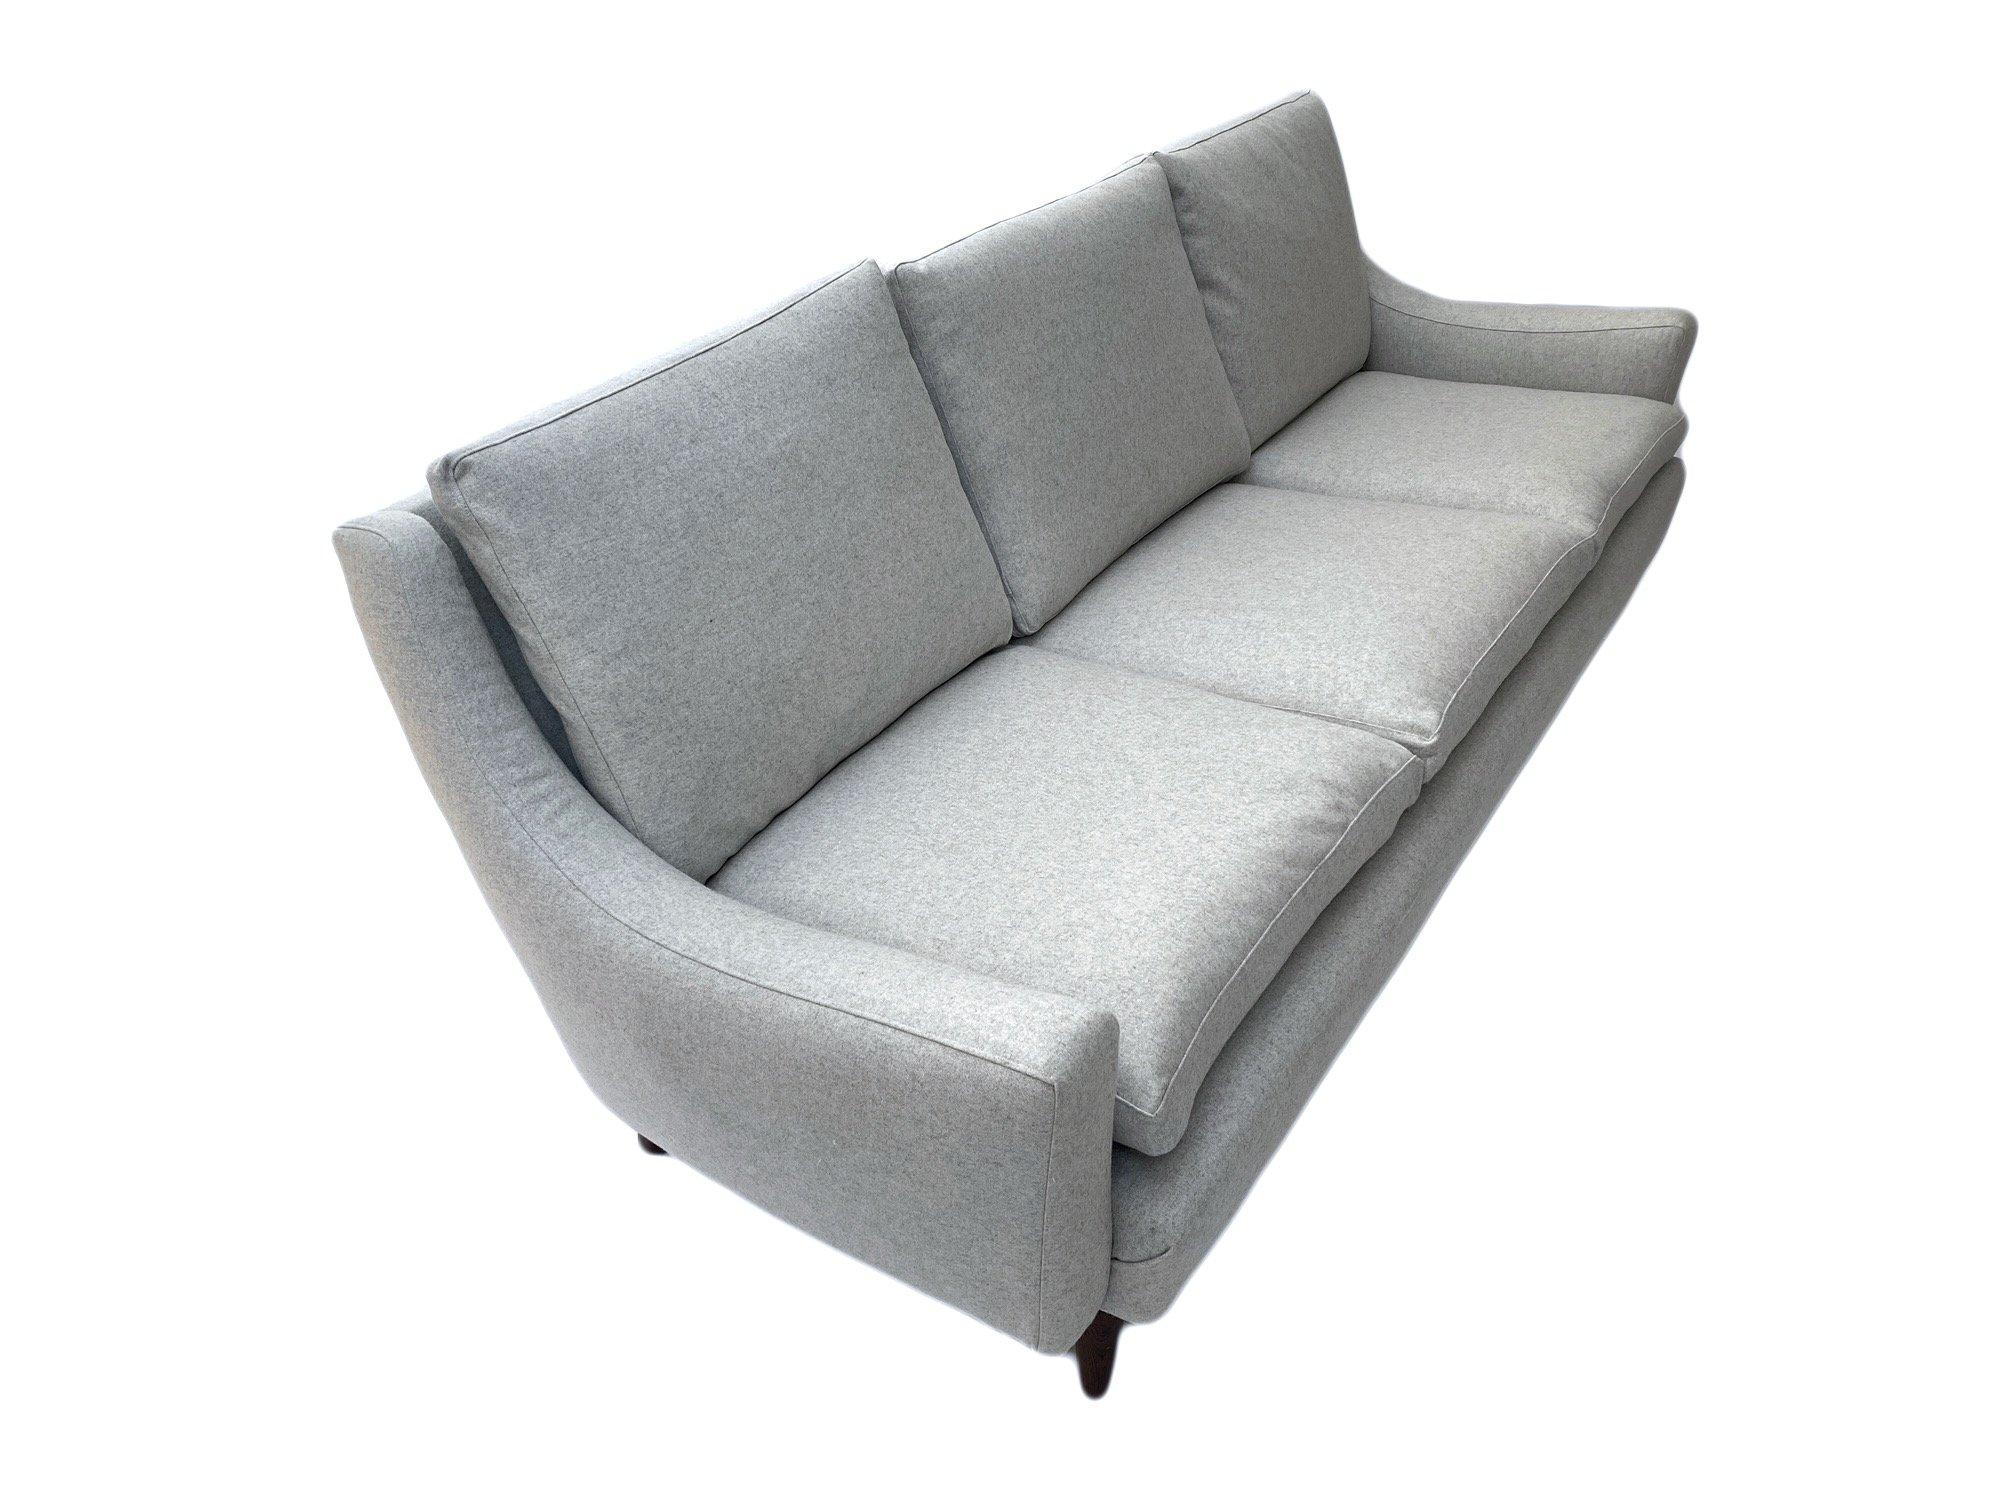 A beautiful Danish light grey wool 3 seater sofa, this would make a stylish addition to any living or work area.

The sofa has a padded armrests and feather cushions for enhanced comfort. A striking piece of classic Scandinavian furniture.

The